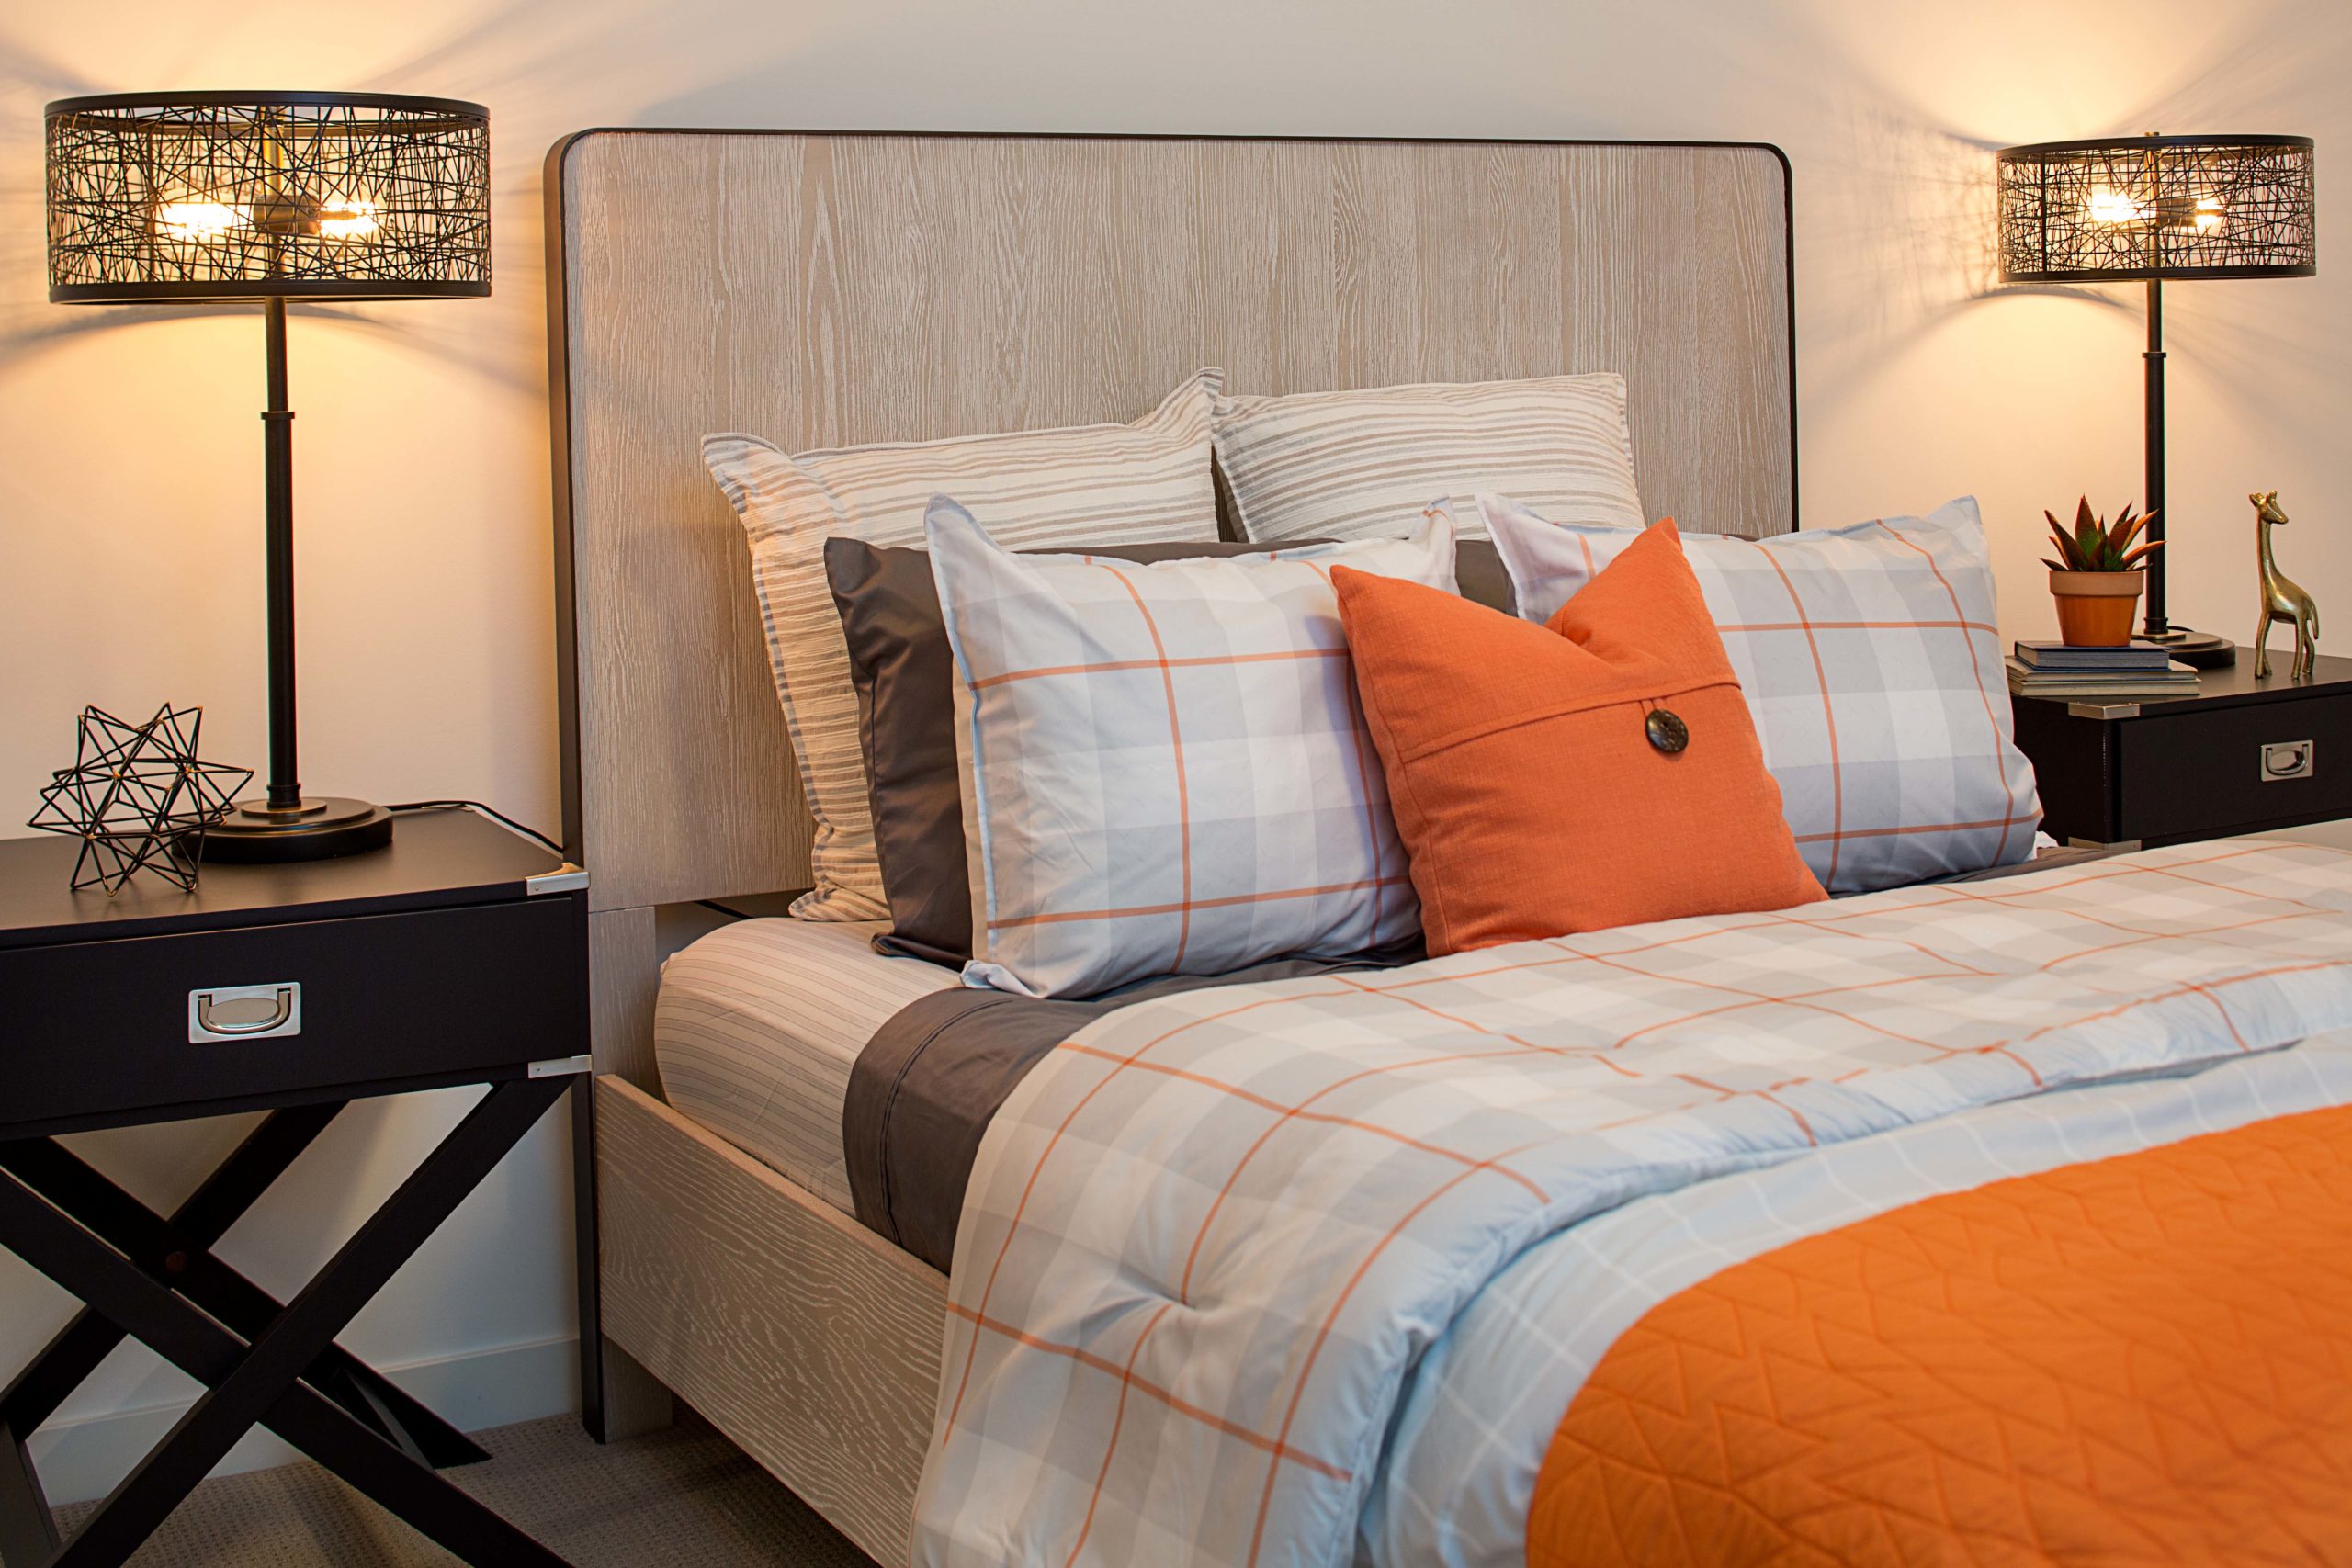 Bed accented with orange, gray and brown bedding situated between matching brown end tables and lights.